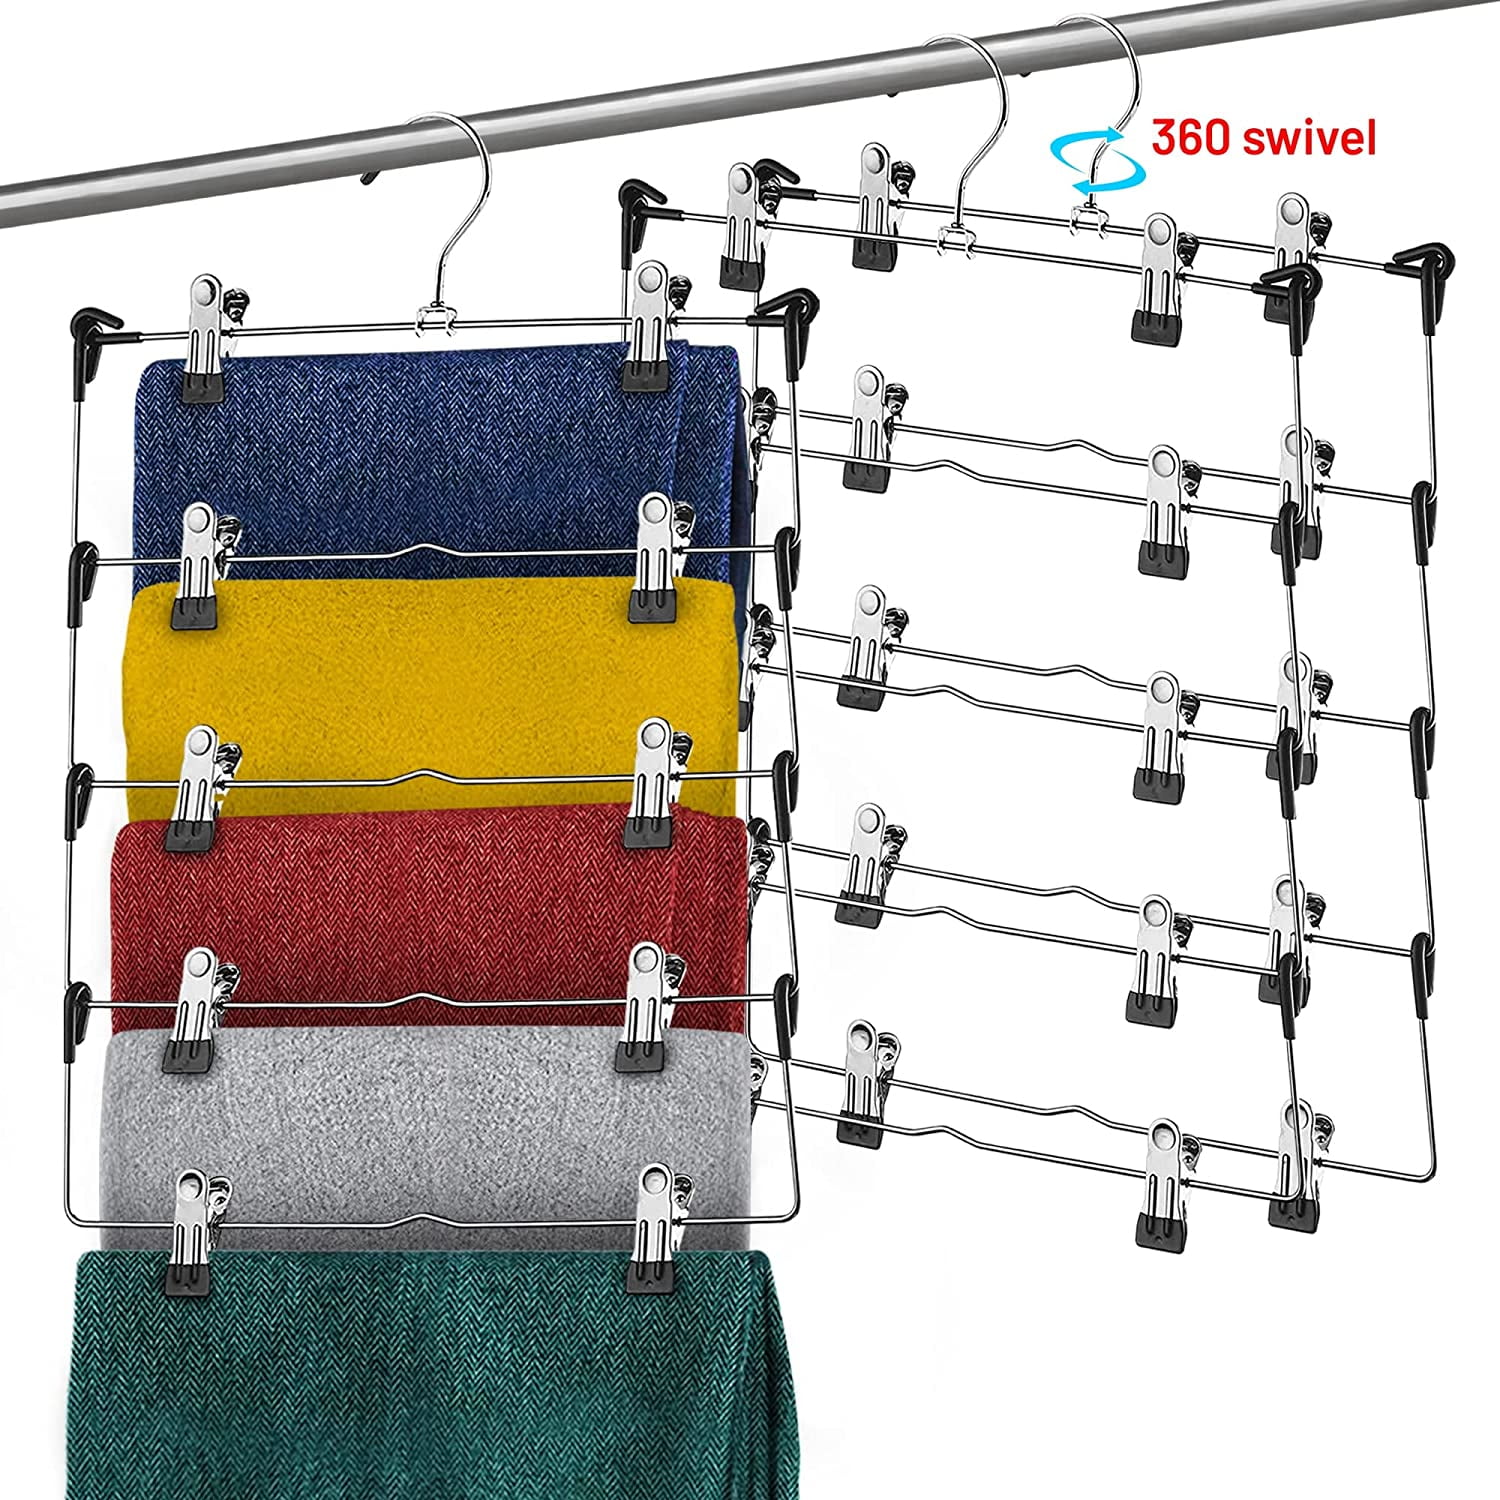 Add-On Metal Pants Hangers with Clips,ESEOE Skirt Hangers Space Saving with  Cascading Hook,Adjustable Non-Slip Clip Hangers for Pants, Jean, Shorts